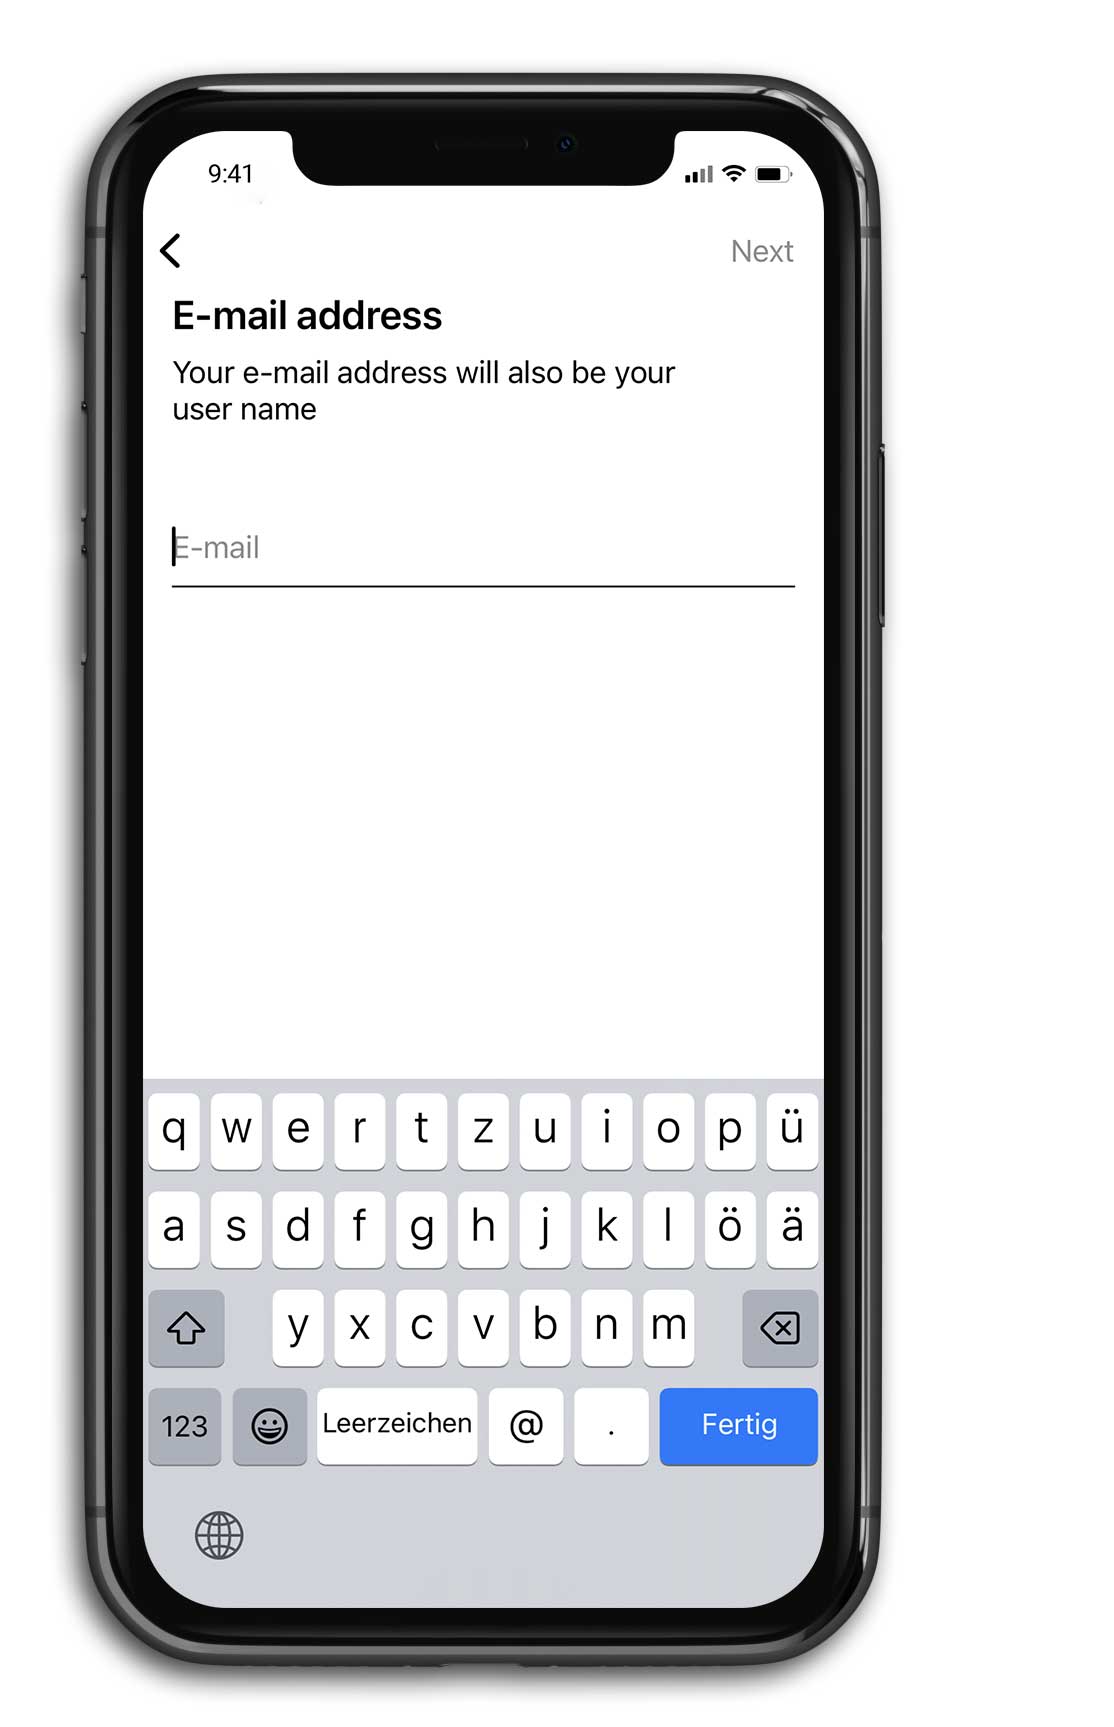 Mobile phone screen with entering the e-mail address